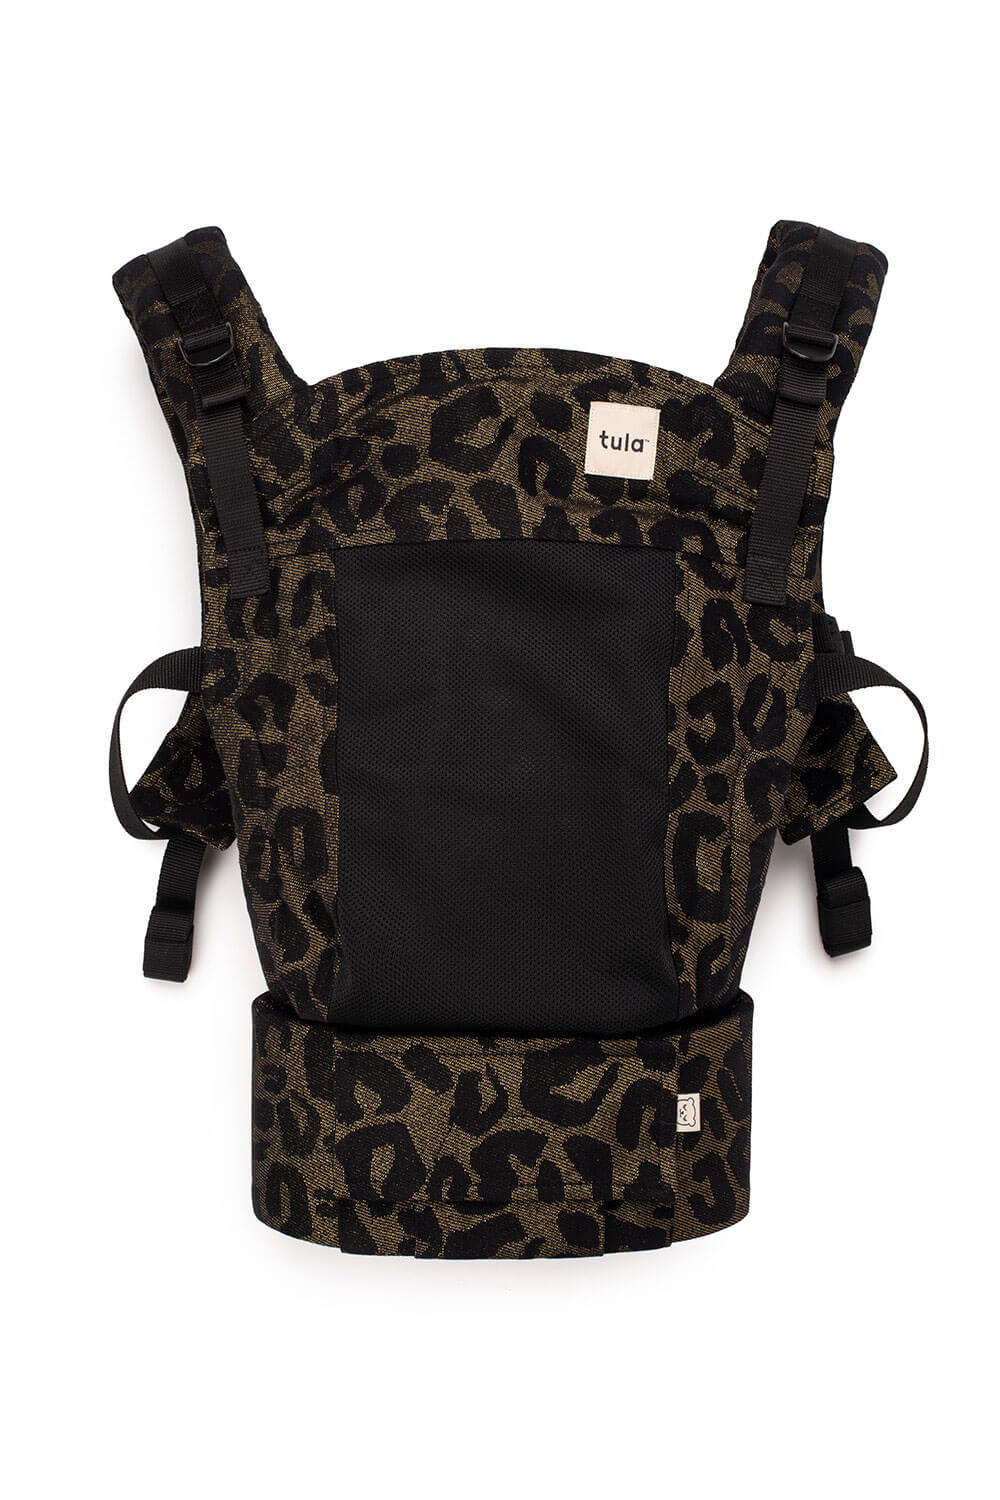 Welcome to the Jungle - Golden Rays - Signature Woven Free-to-Grow Mesh Baby Carrier